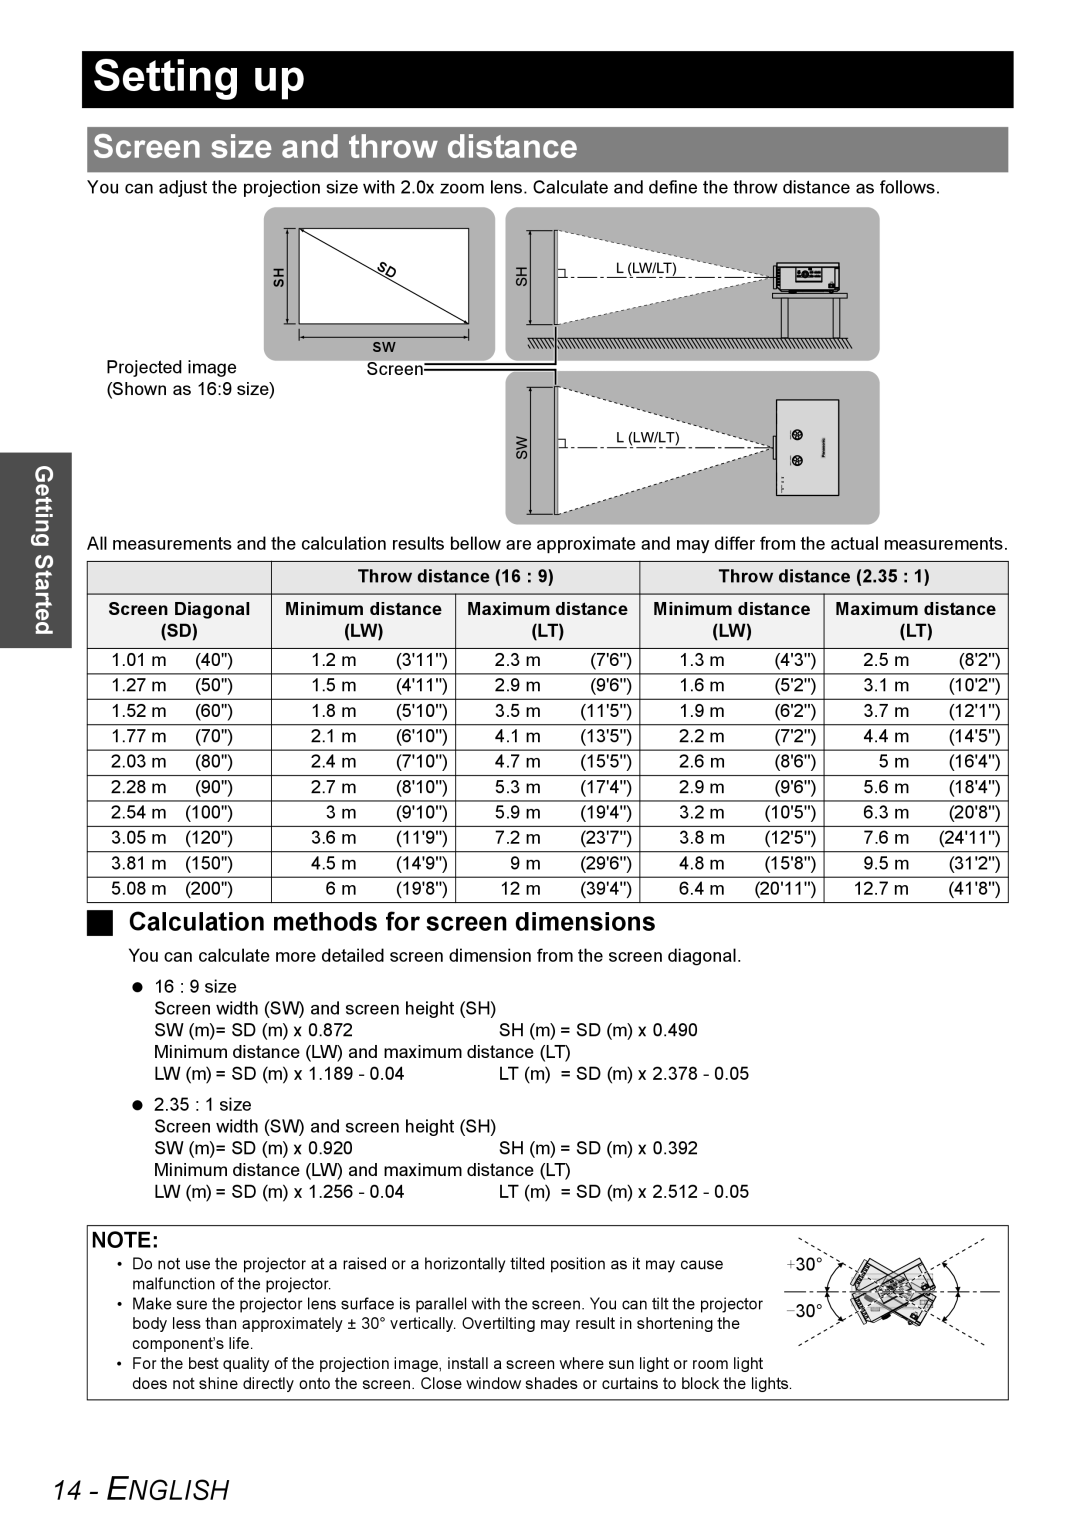 Panasonic PT-AE3000E manual Setting up, Screen size and throw distance, English, Calculation methods for screen dimensions 